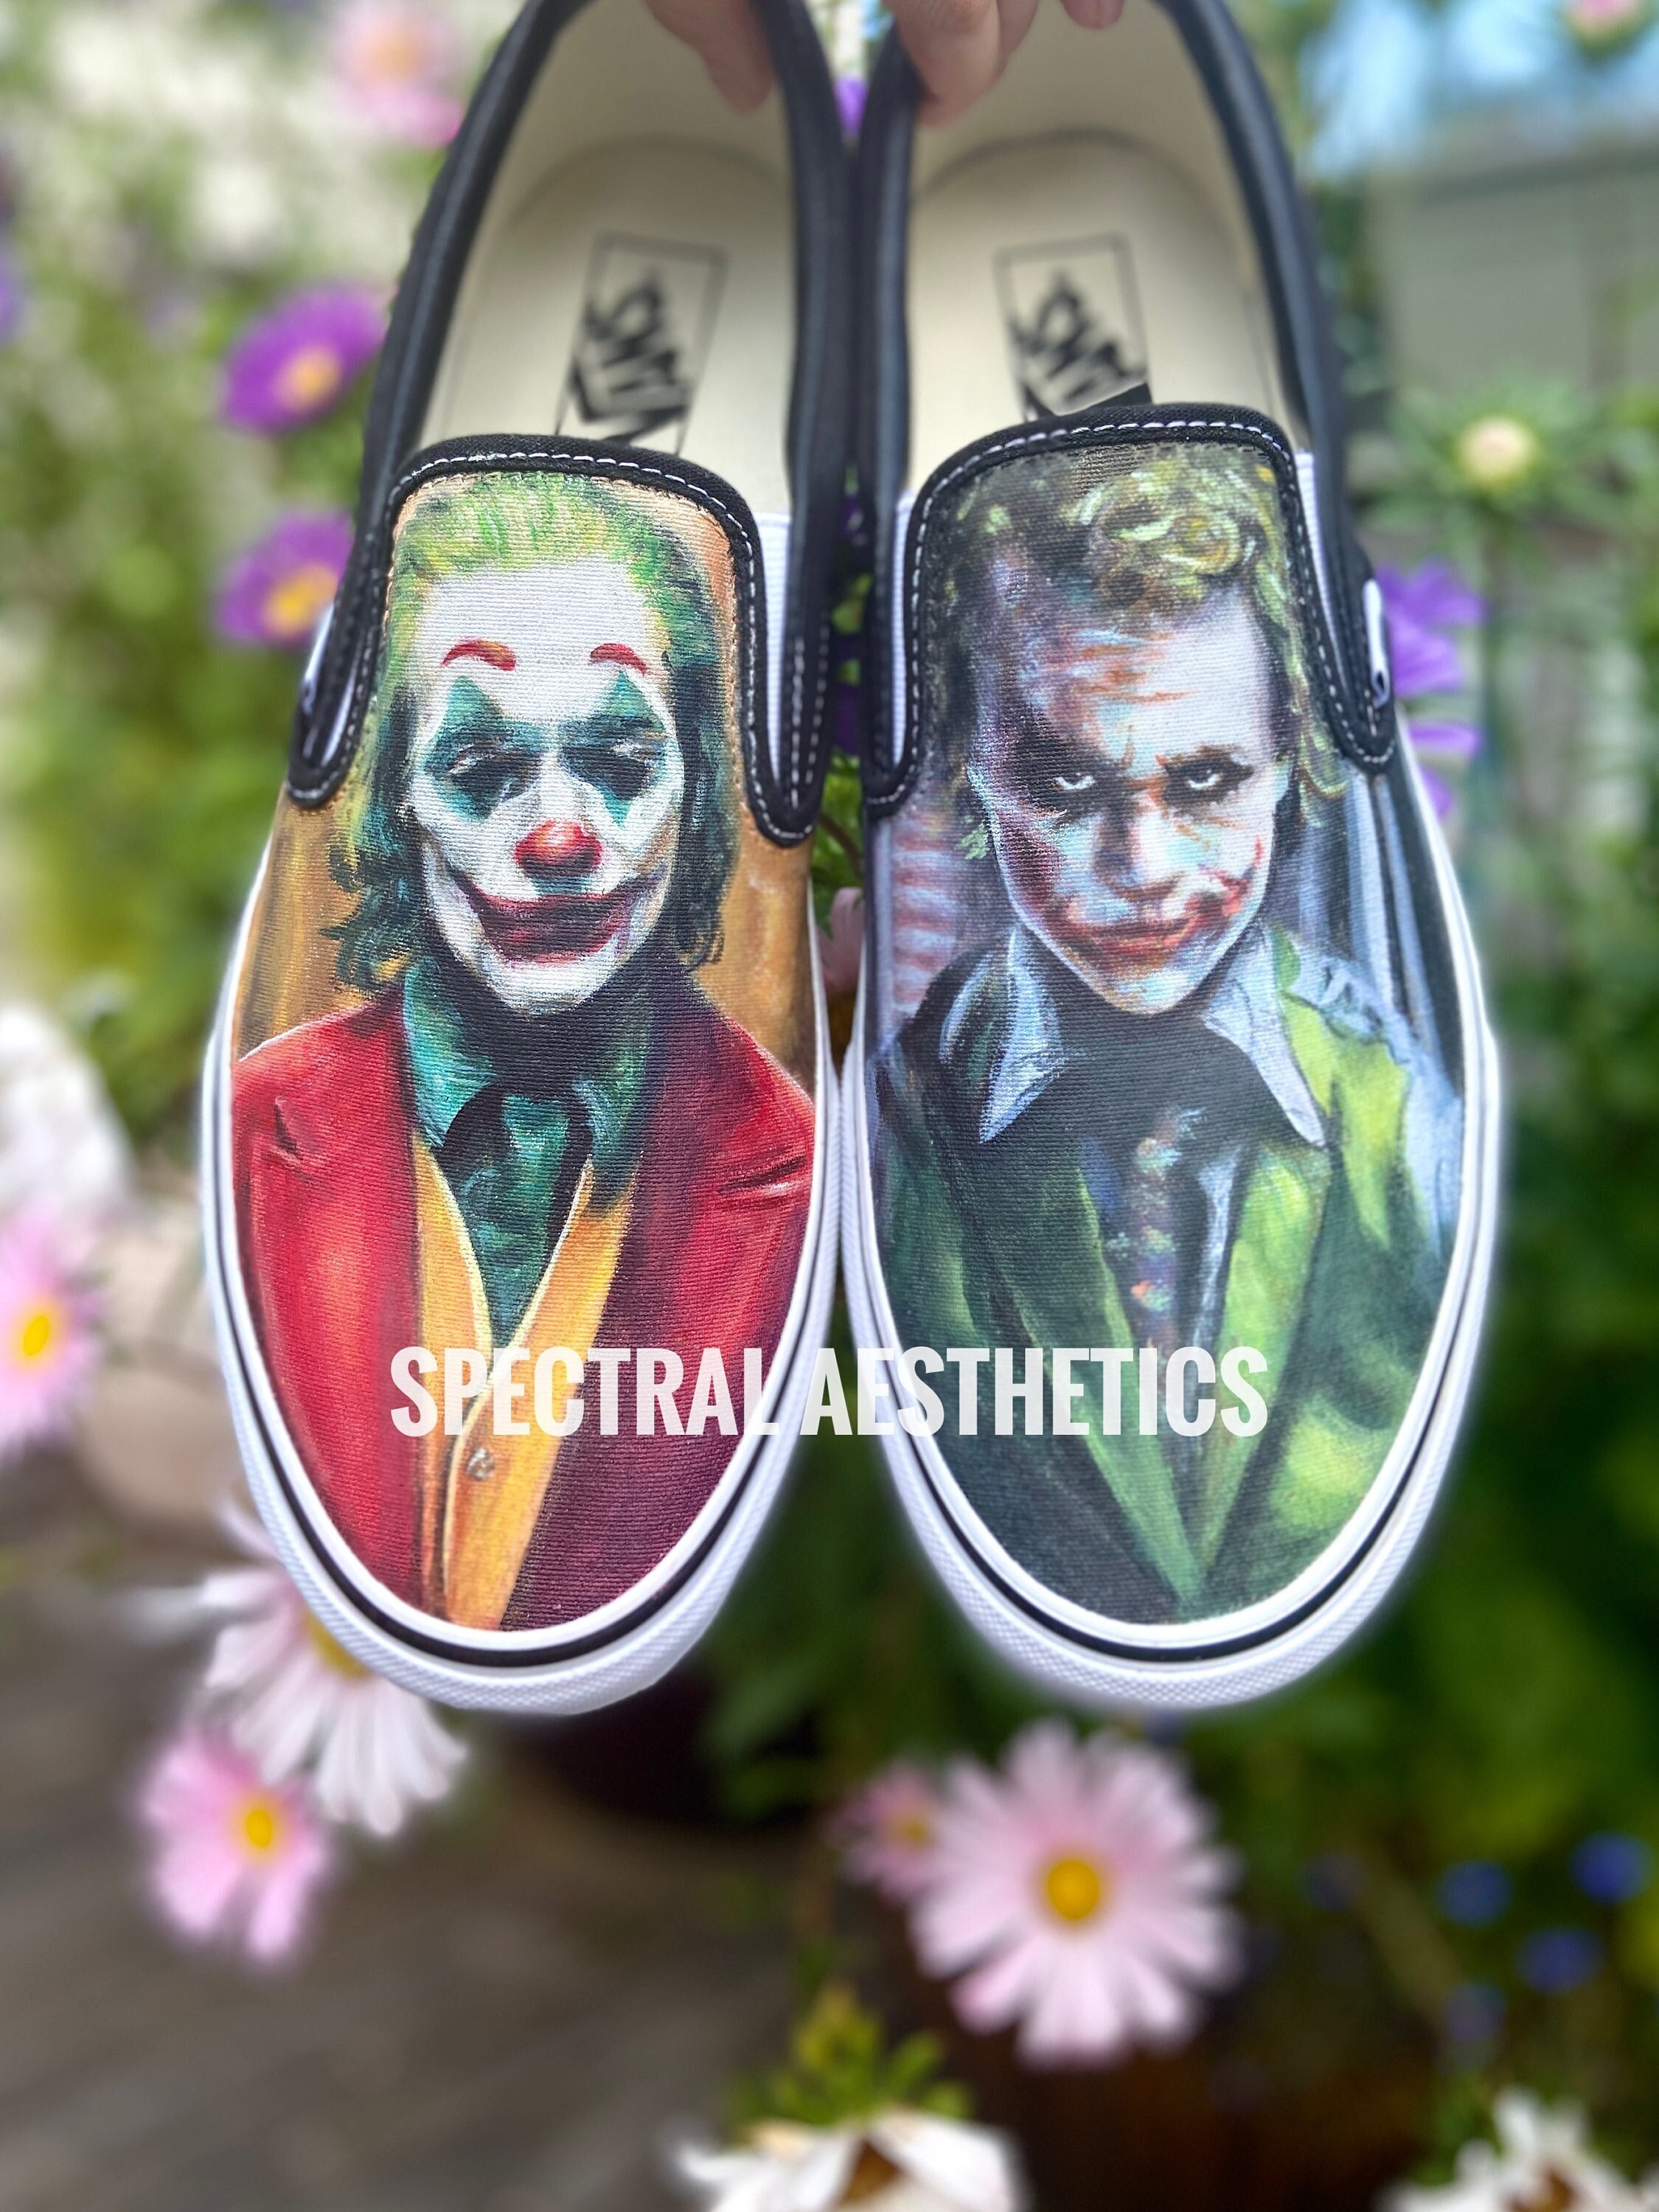 THE JOKER BATMAN VINYL STENCIL FOR CUSTOM SHOES SNEAKERS AND SMALL PROJECTS